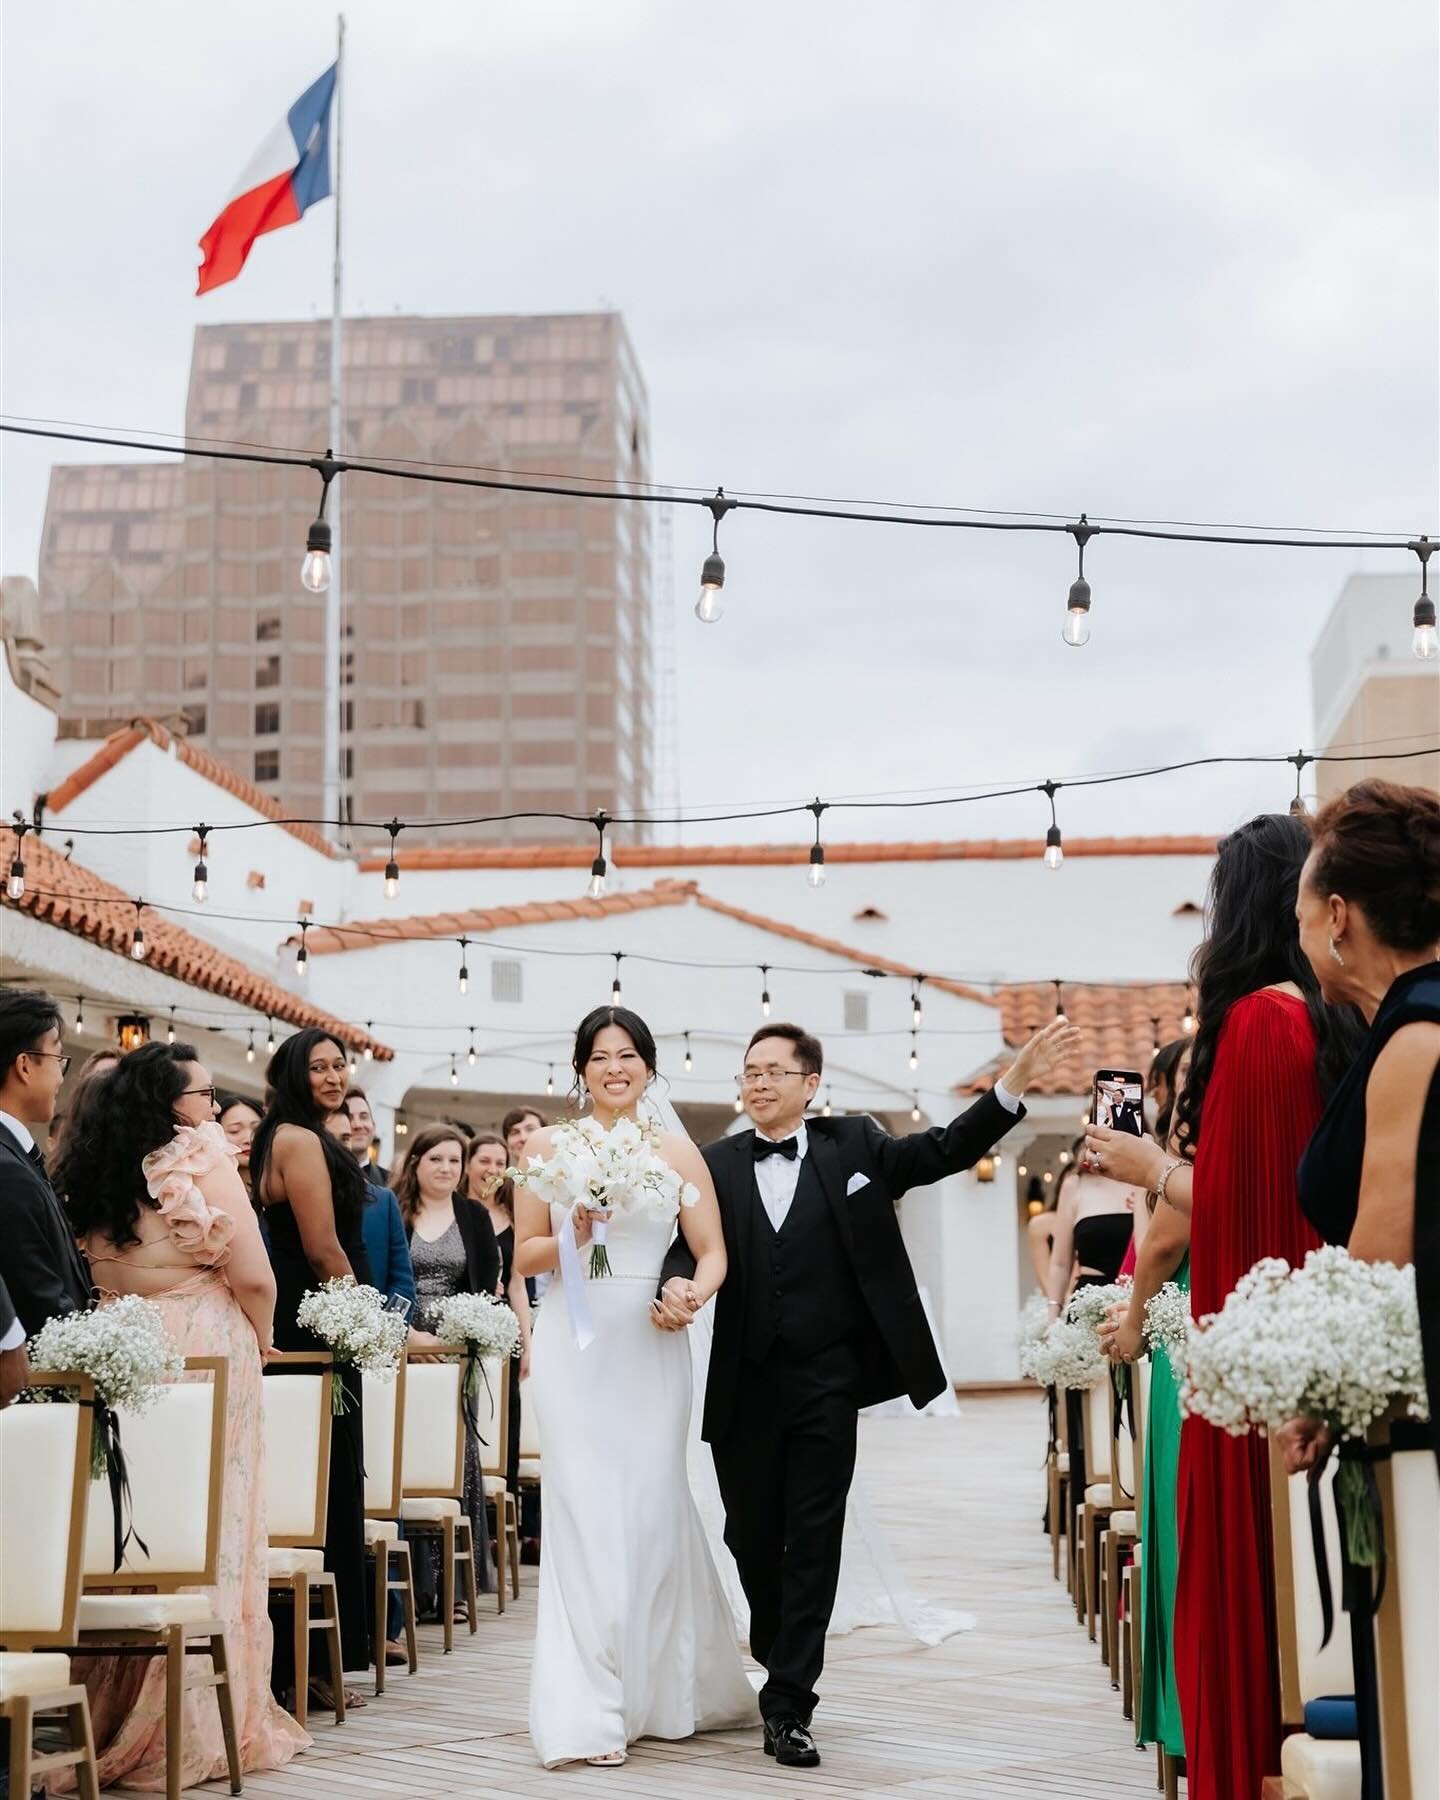 Mandy &amp; Javier | The St. Anthony Hotel, San Antonio, TX ✨

Some rooftop ceremony inspiration, courtesy of Sweet August Events, along with  an amazing team of vendors&hellip;and of course, the beautiful St. Anthony Hotel! 😍
.
.
.
Venue, Catering,